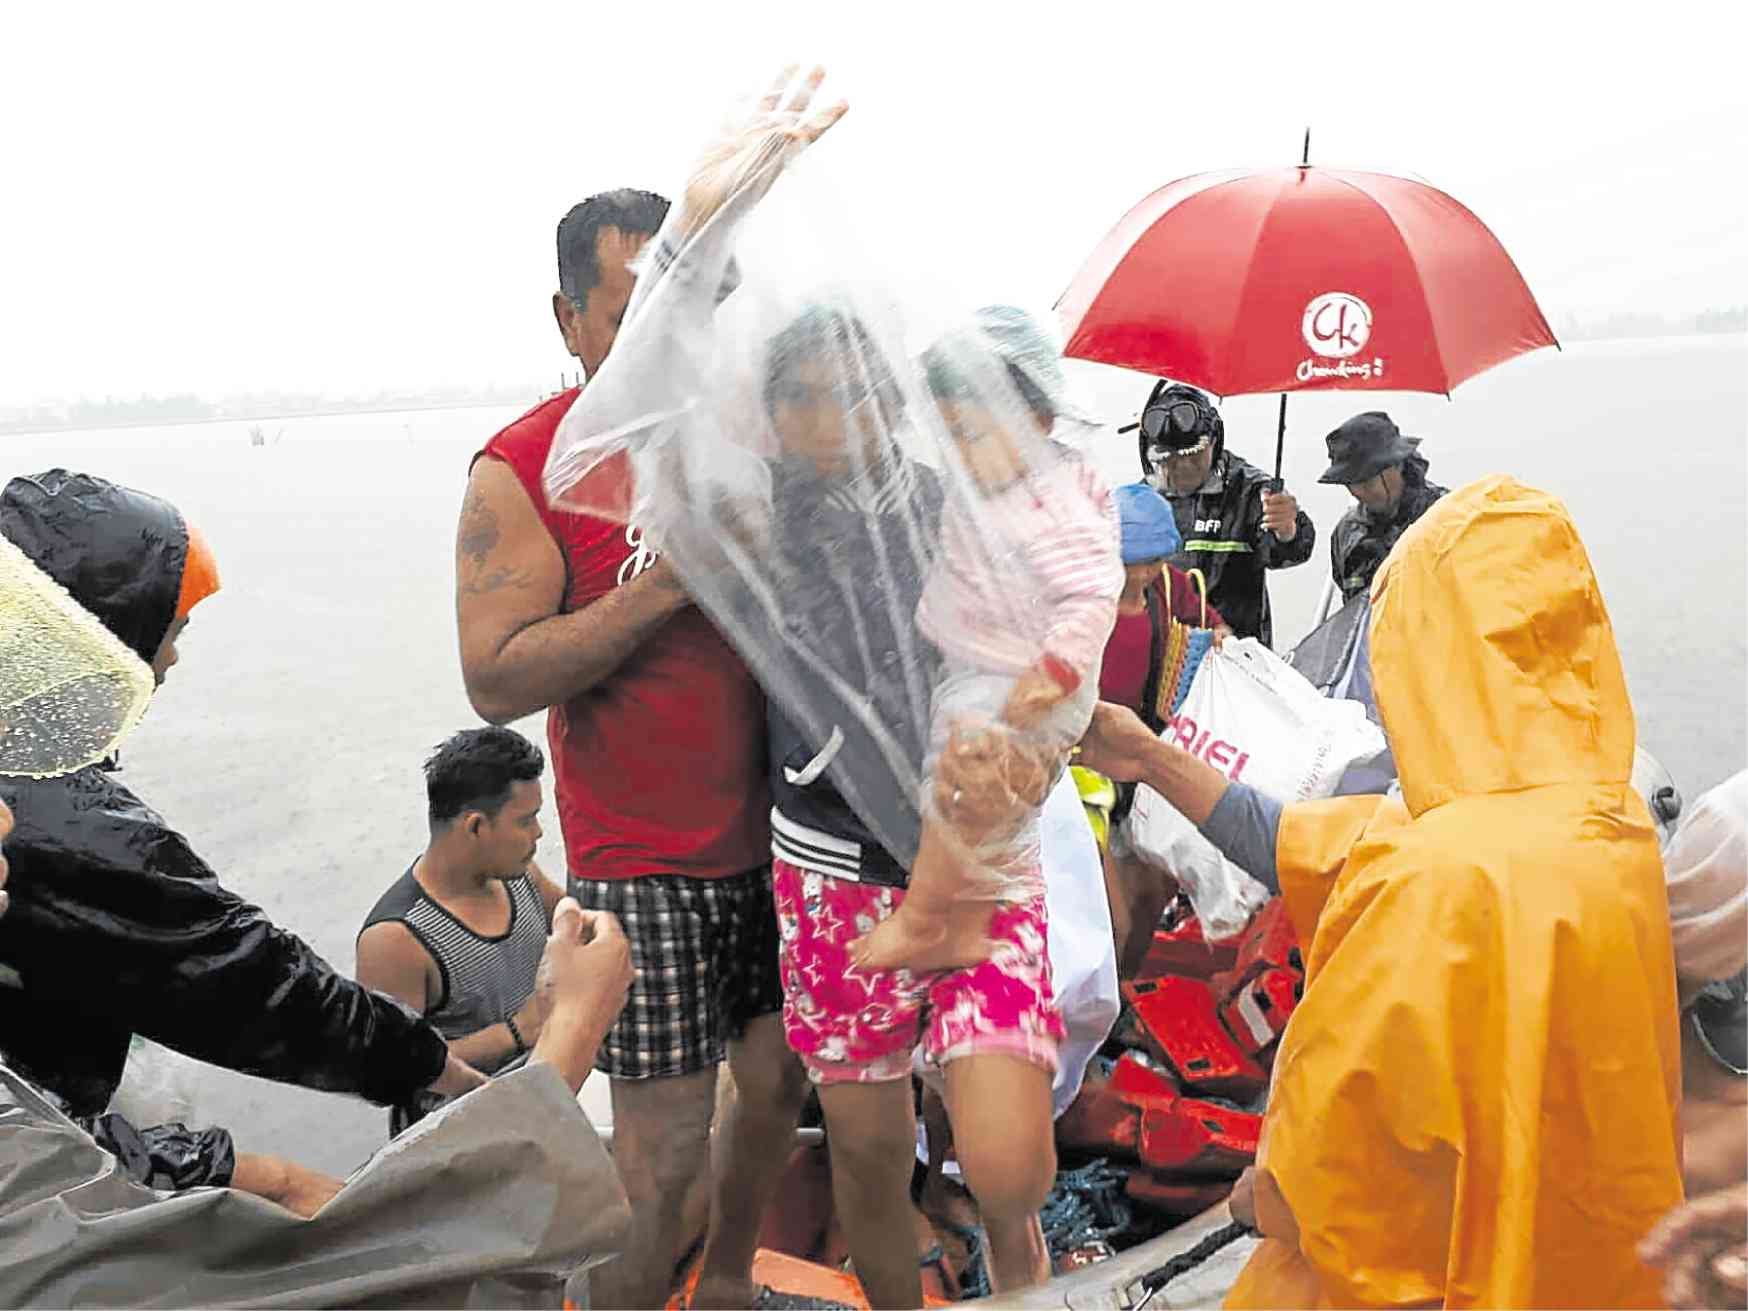 YEAR-END STORM Tropical Depression “Usman” dumped heavy rain on Eastern Visayas and Bicol provinces on Friday and Saturday, triggering floods and landslides that killed at least nine people, including four children, and displaced thousands of families. —MICHAEL B. JAUCIAN